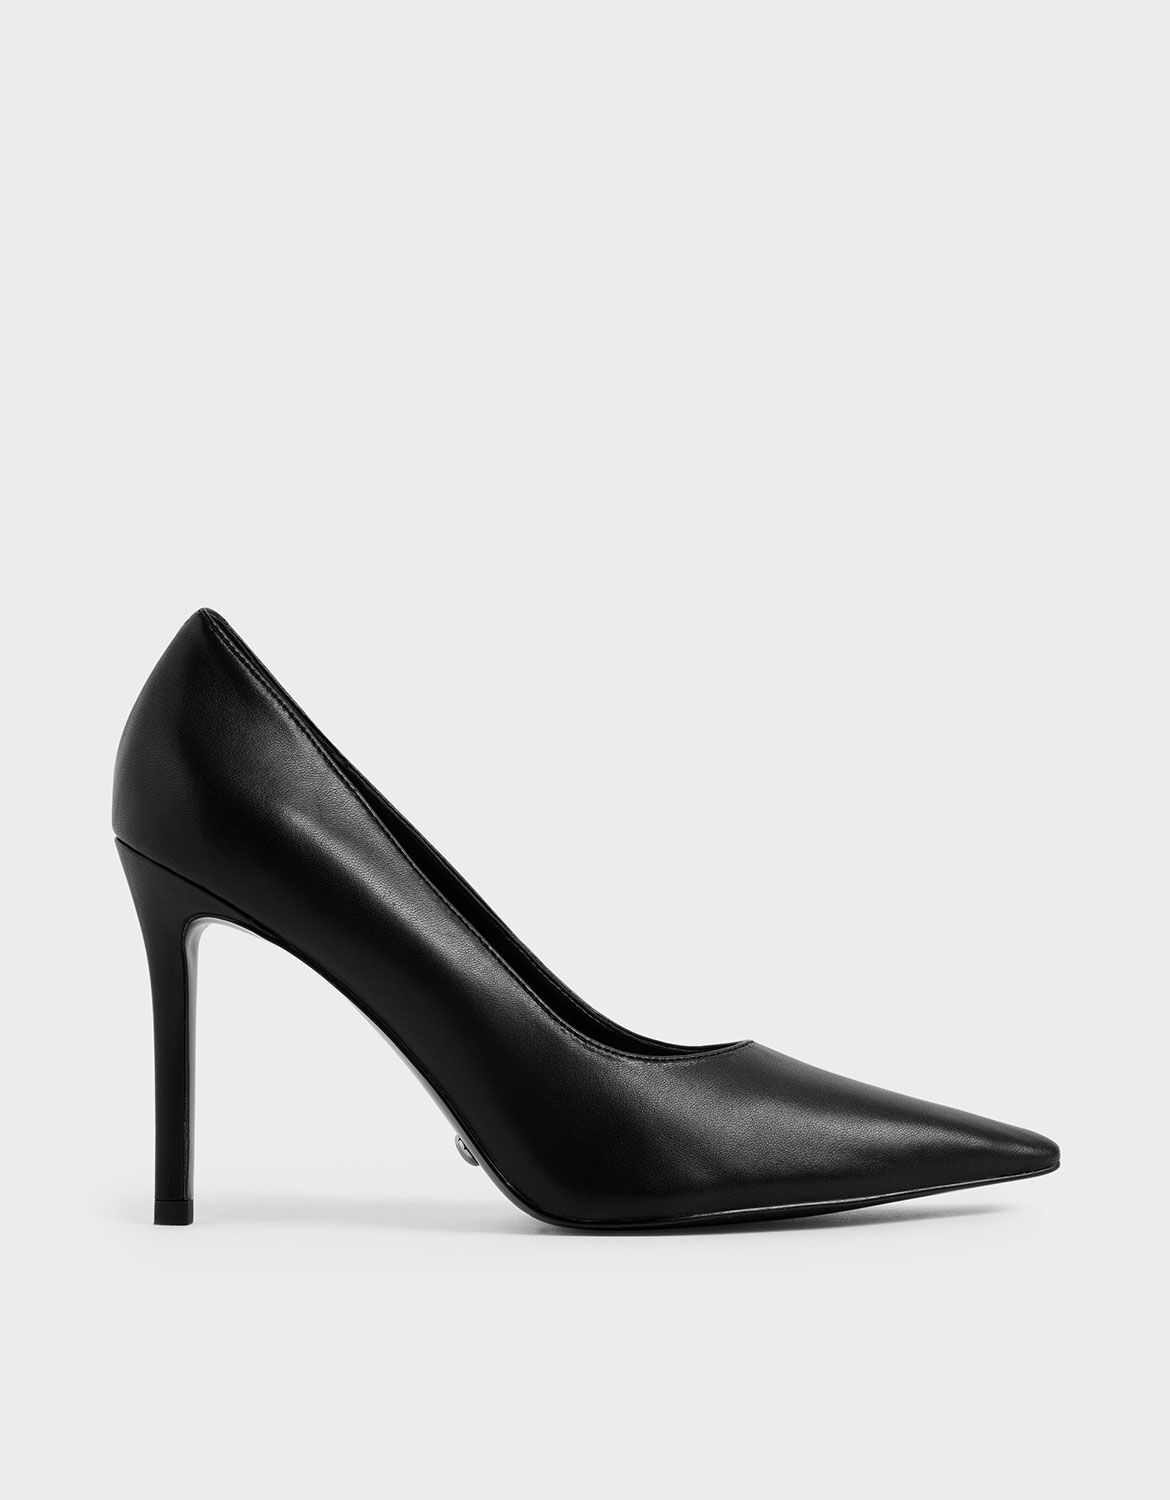 Black Patent Leather Pointed Toe 